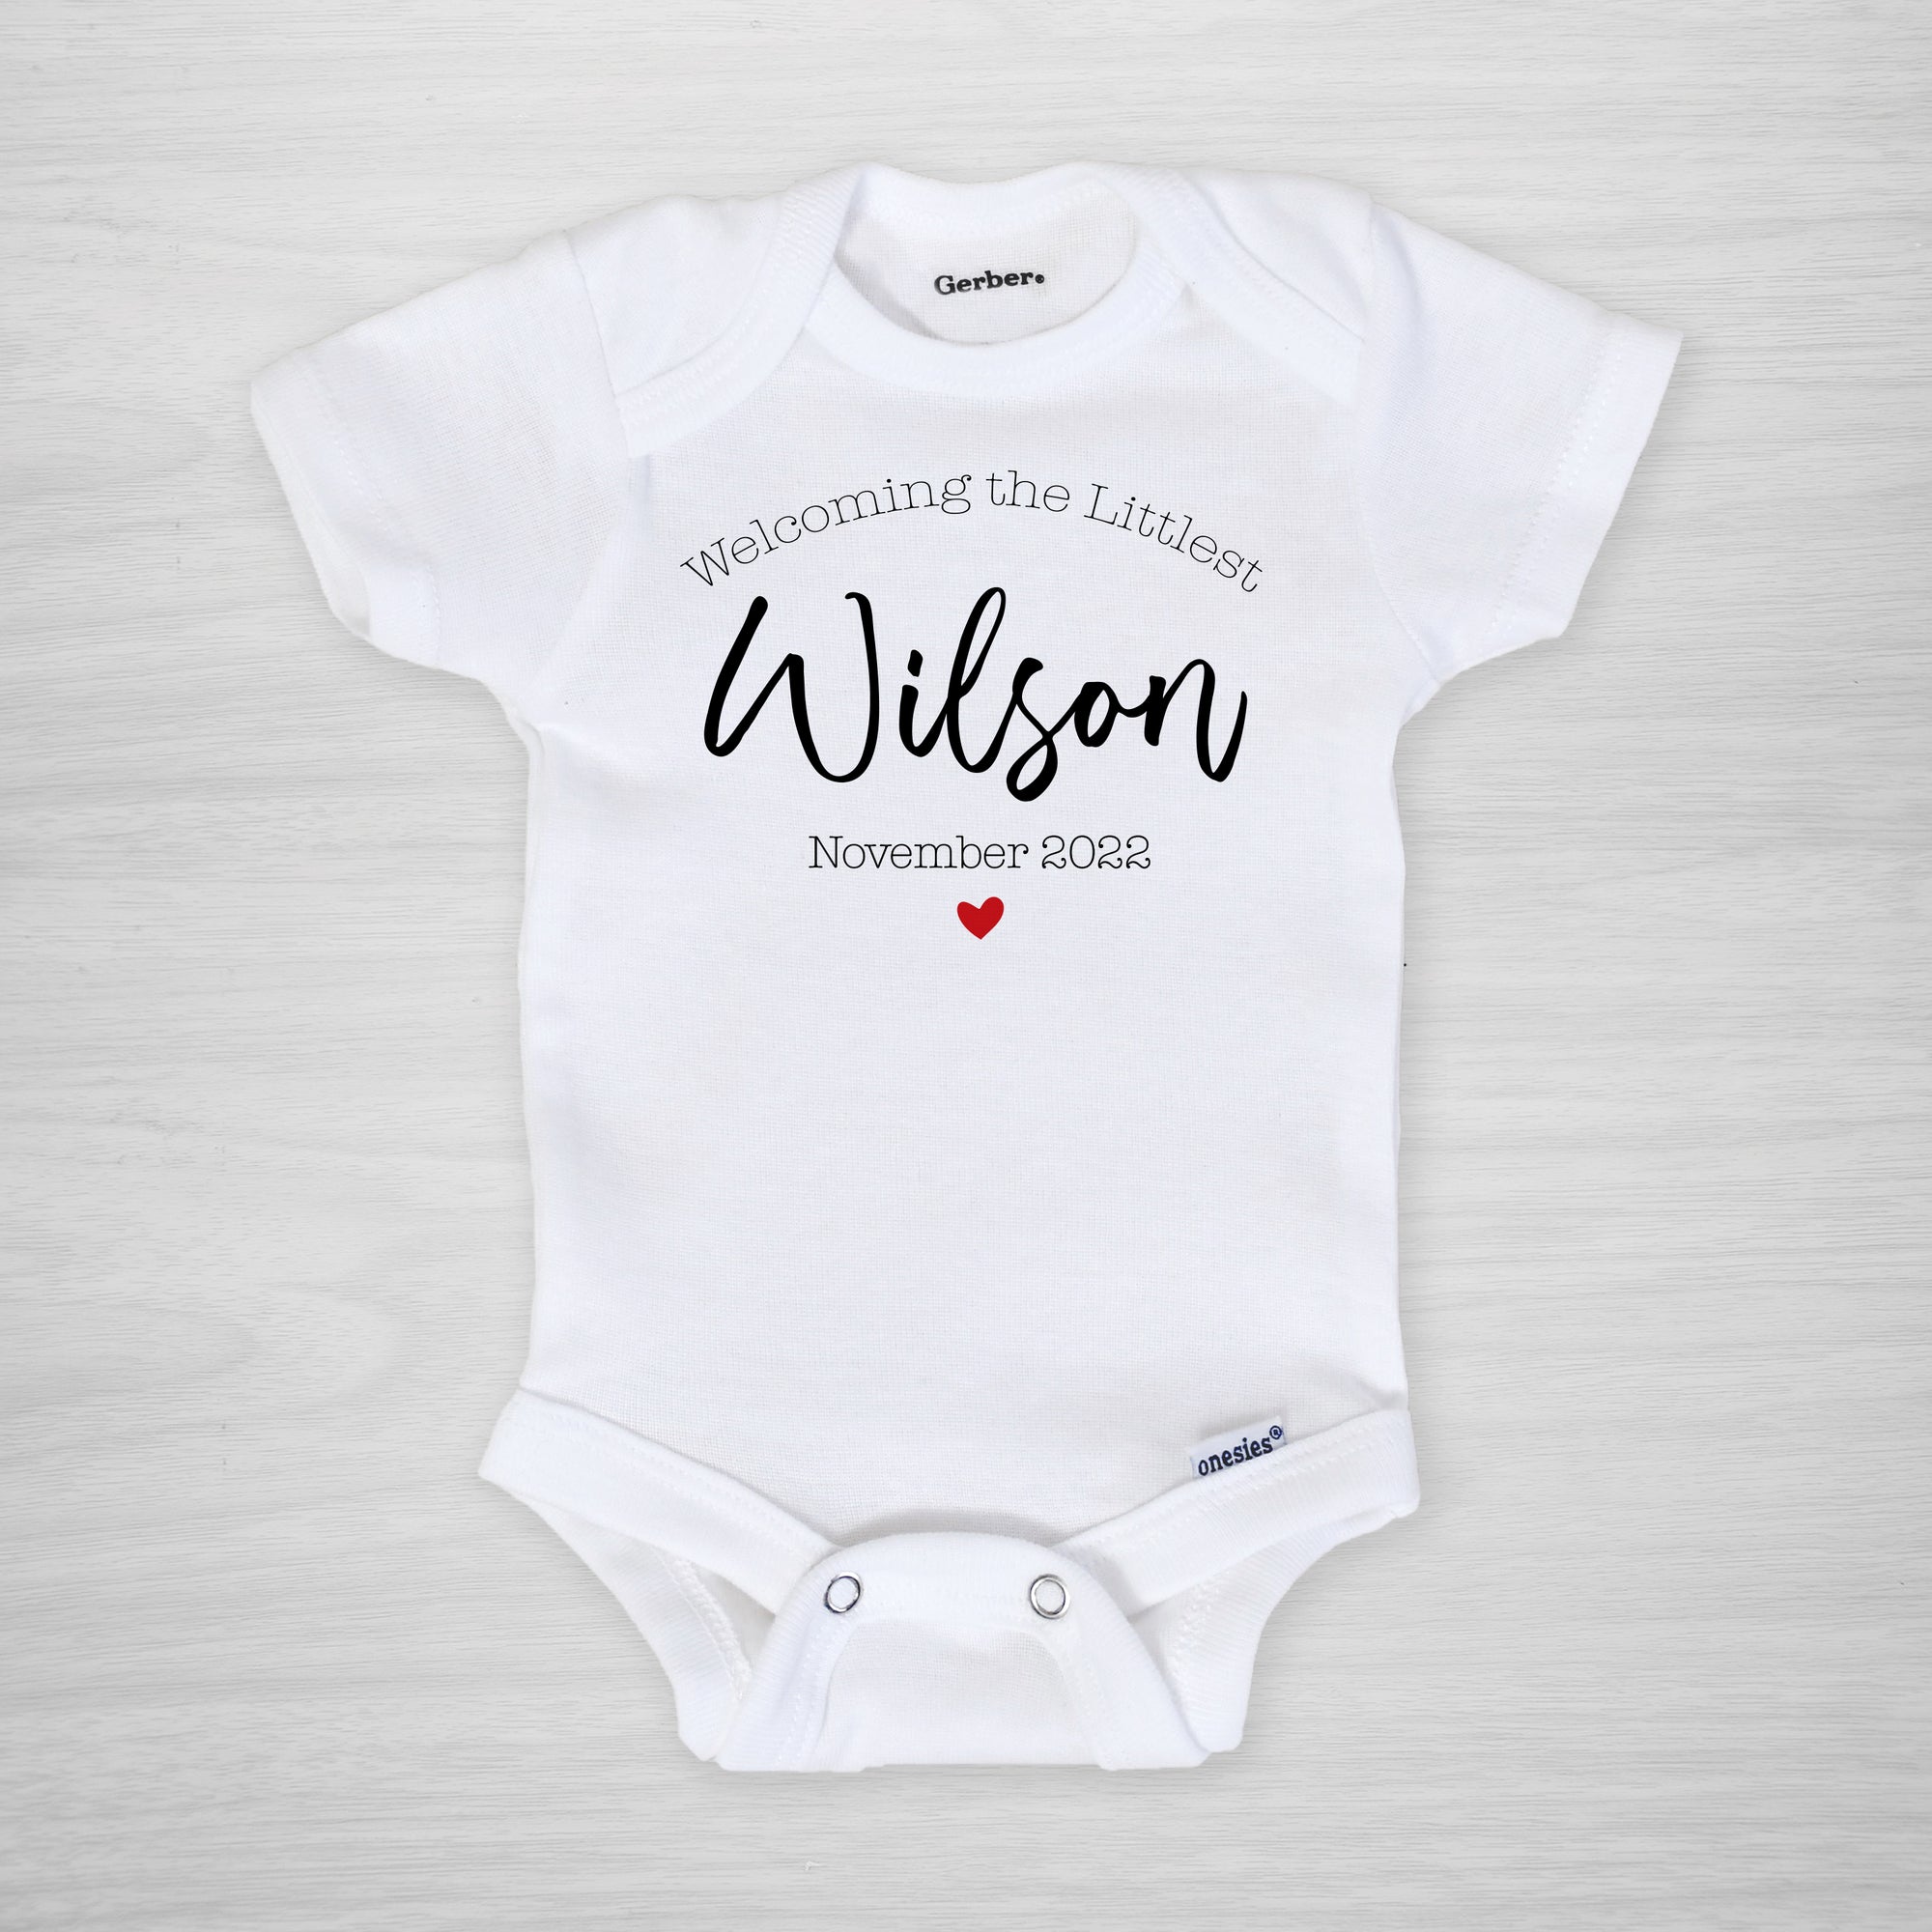 Pregnancy Announcement Onesie, Personalized, "Welcoming the Littlest", Short Sleeved